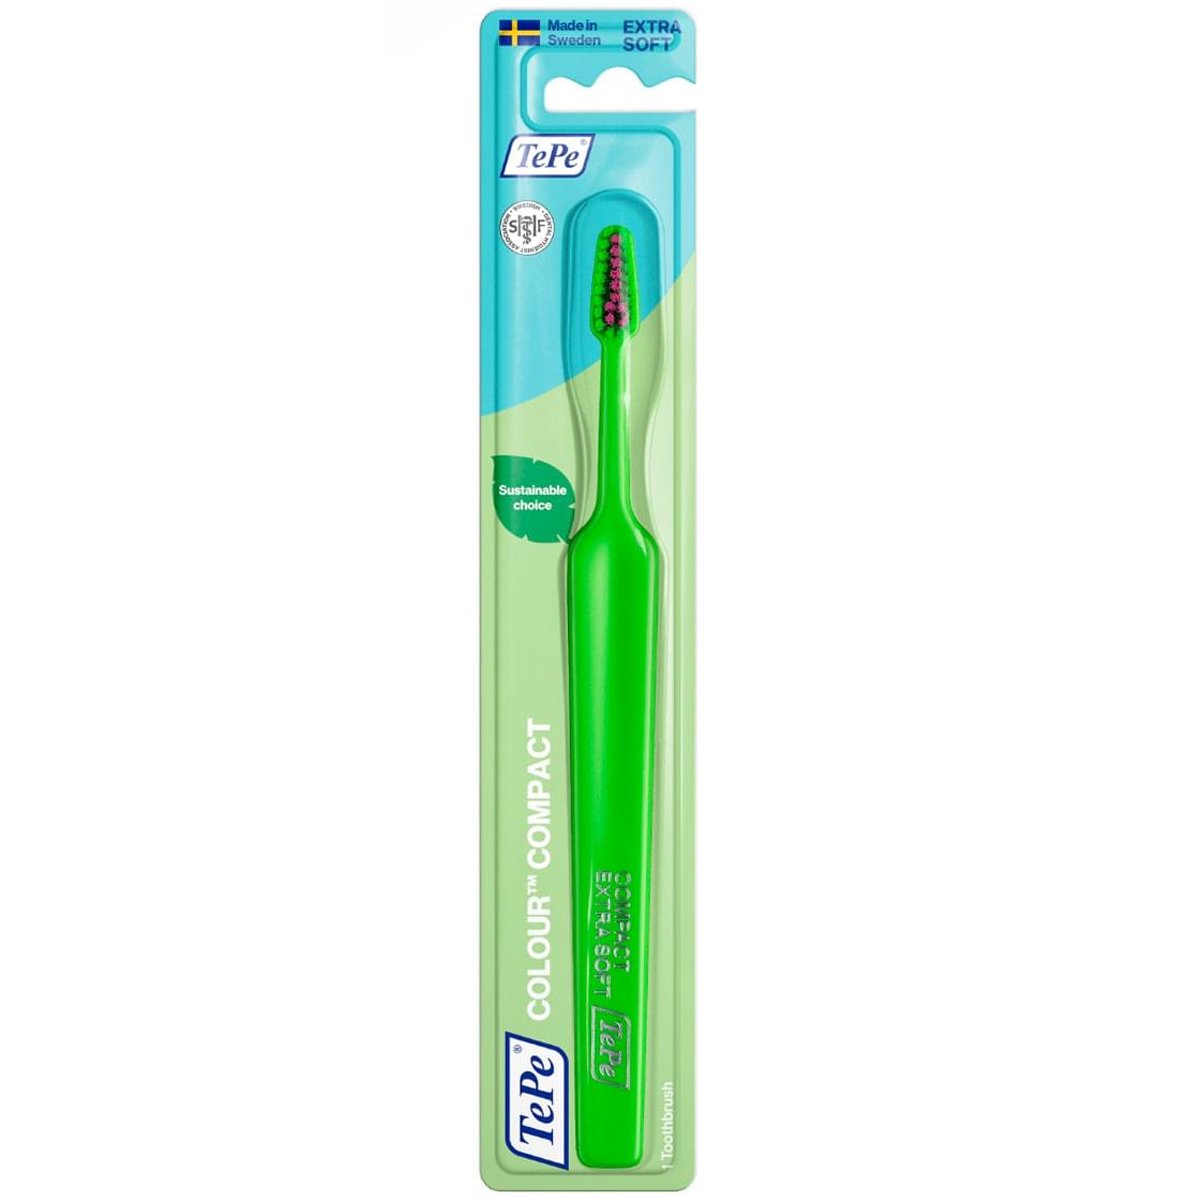 TePe Colour Compact Extra Soft Toothbrush Πολύ Μαλακή Οδοντόβουρτσα για Αποτελεσματικό & Απαλό Καθαρισμό 1 Τεμάχιο – Πράσινο